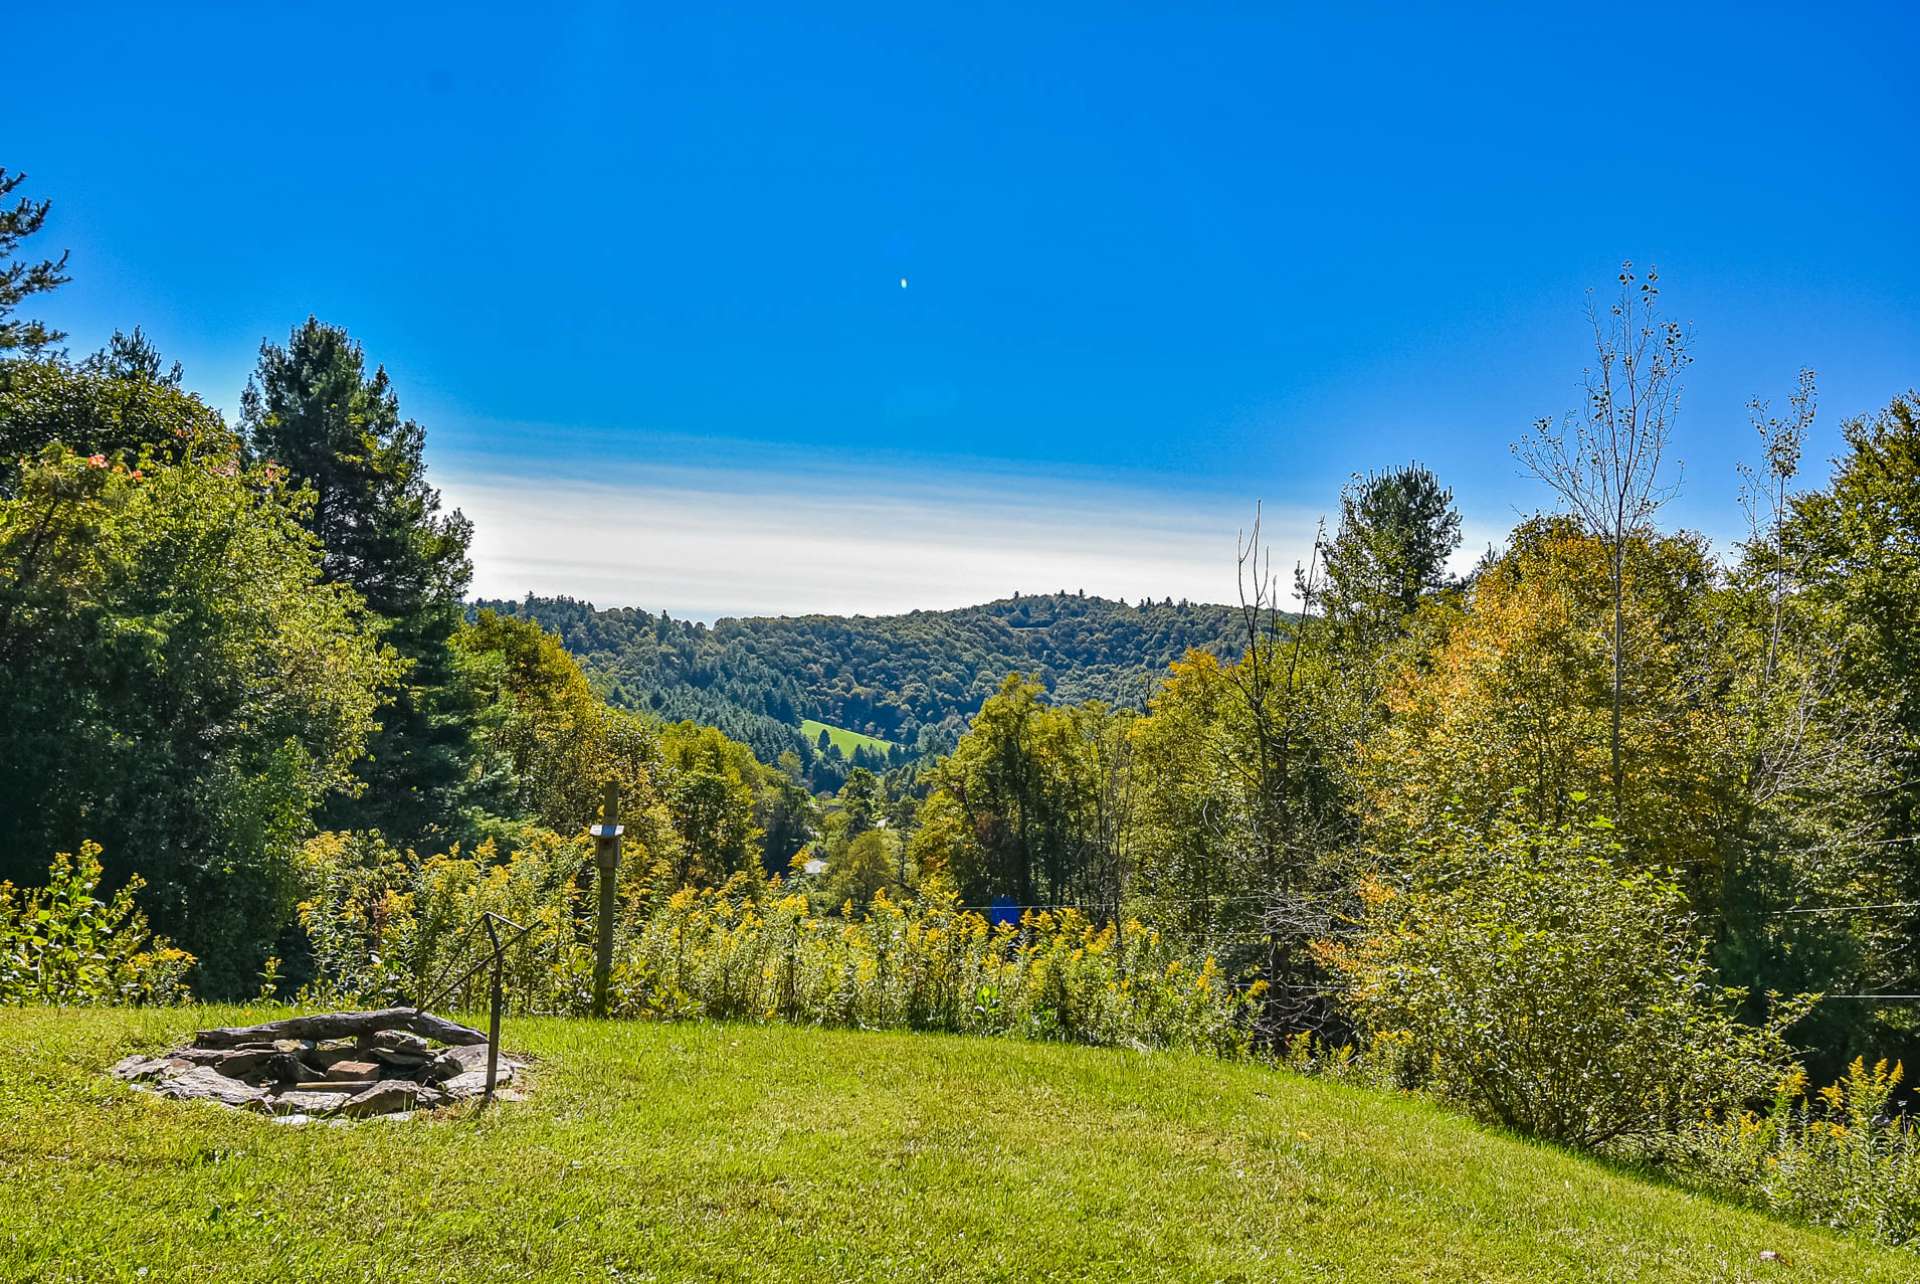 The front yard provides a firepit and a great place to gather with family and friends making smores and sharing old memories while making new memories of time spent in the North Carolina Mountains.